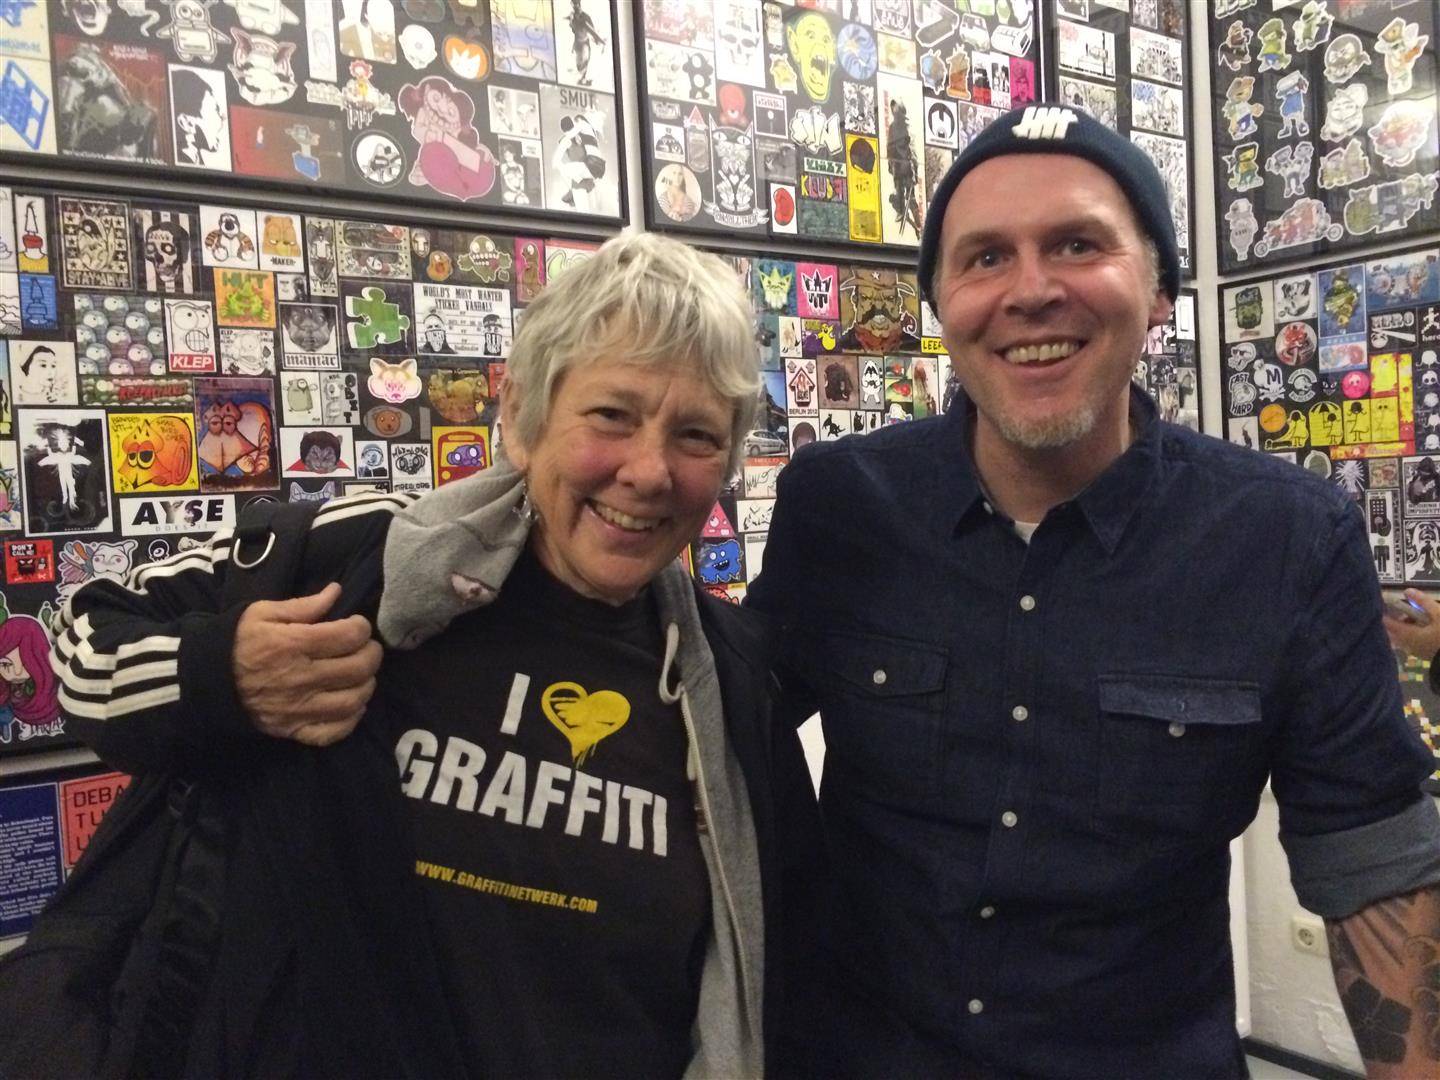   MARTHA COOPER and OLIVER BAUDACH at the hatch sticker museum in berlin